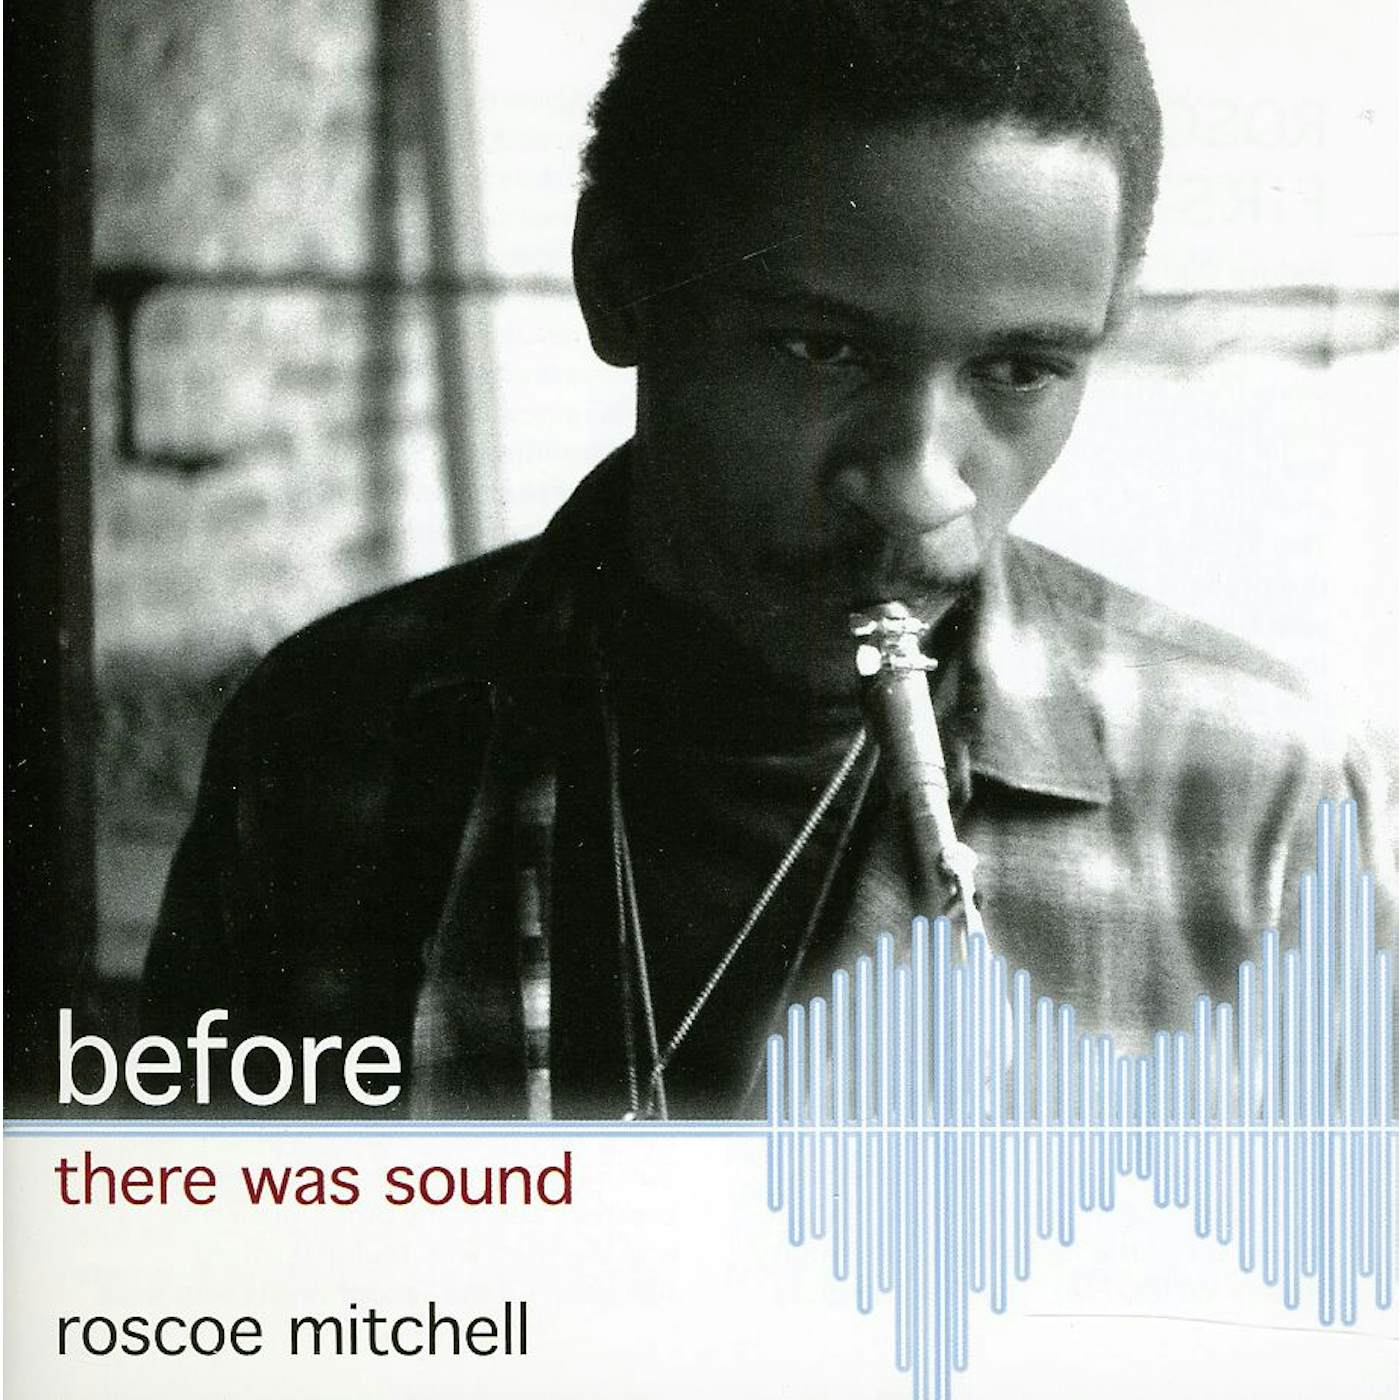 Roscoe Mitchell BEFORE THERE WAS SOUND CD